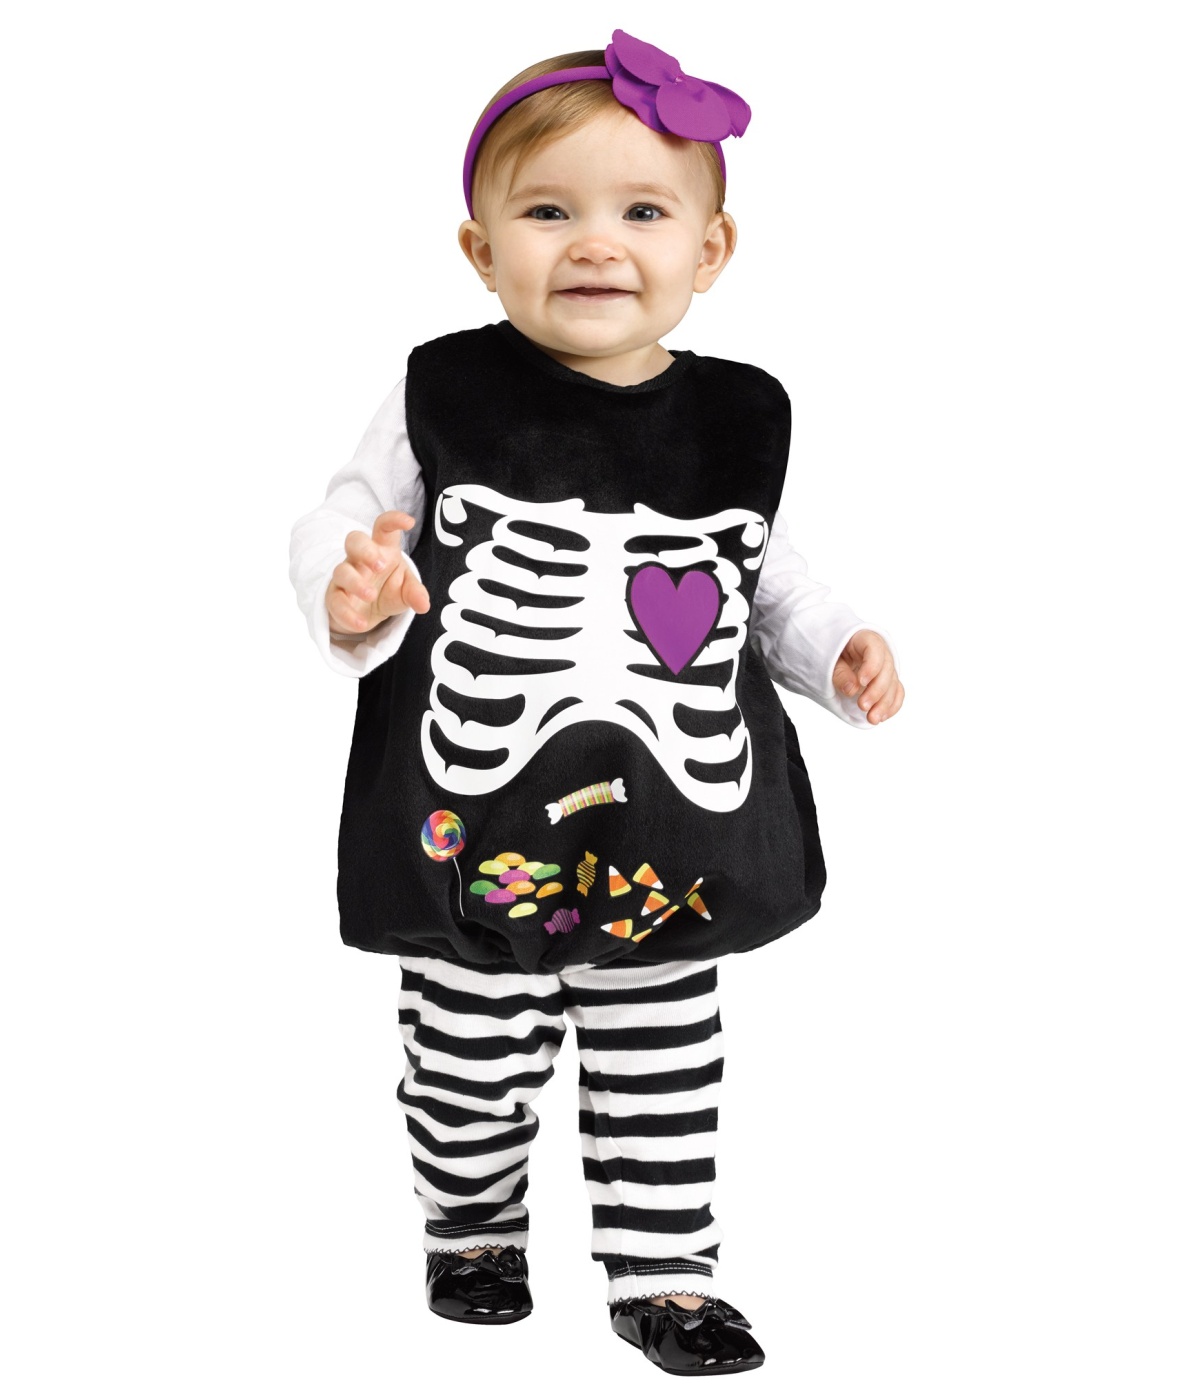  Jelly Skelly Belly Baby Costume